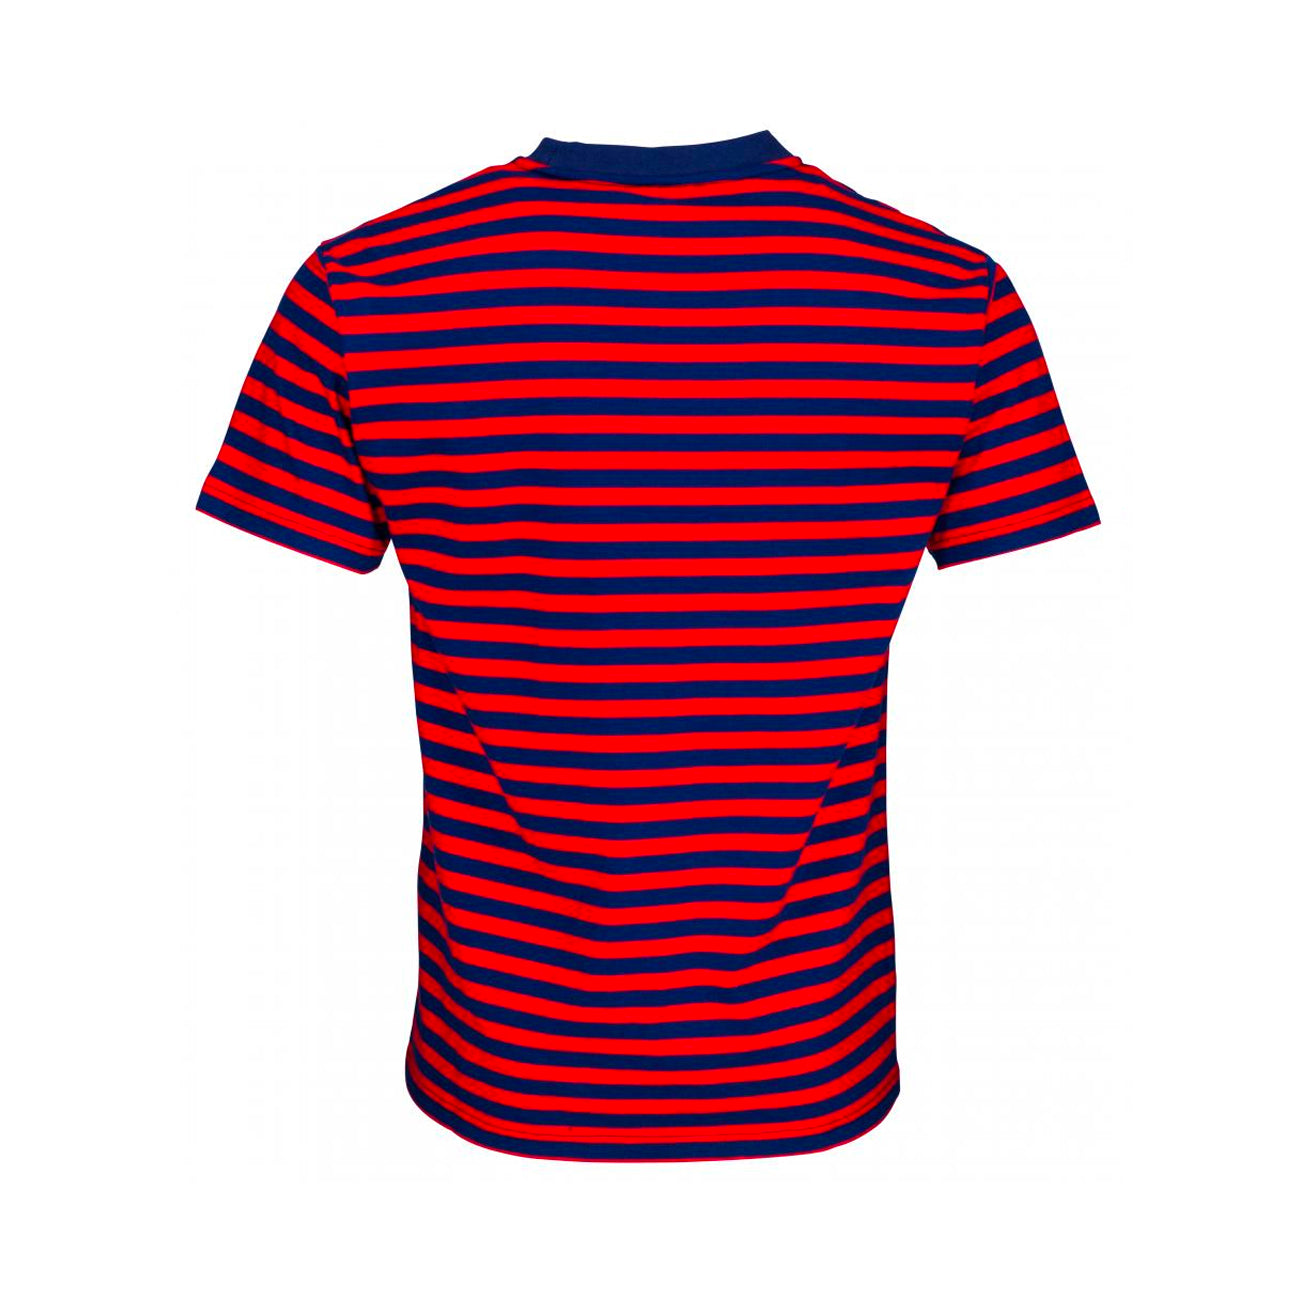 Independent Custom Top Melon Custom Tee Cardinal Red/Navy - Prime Delux Store